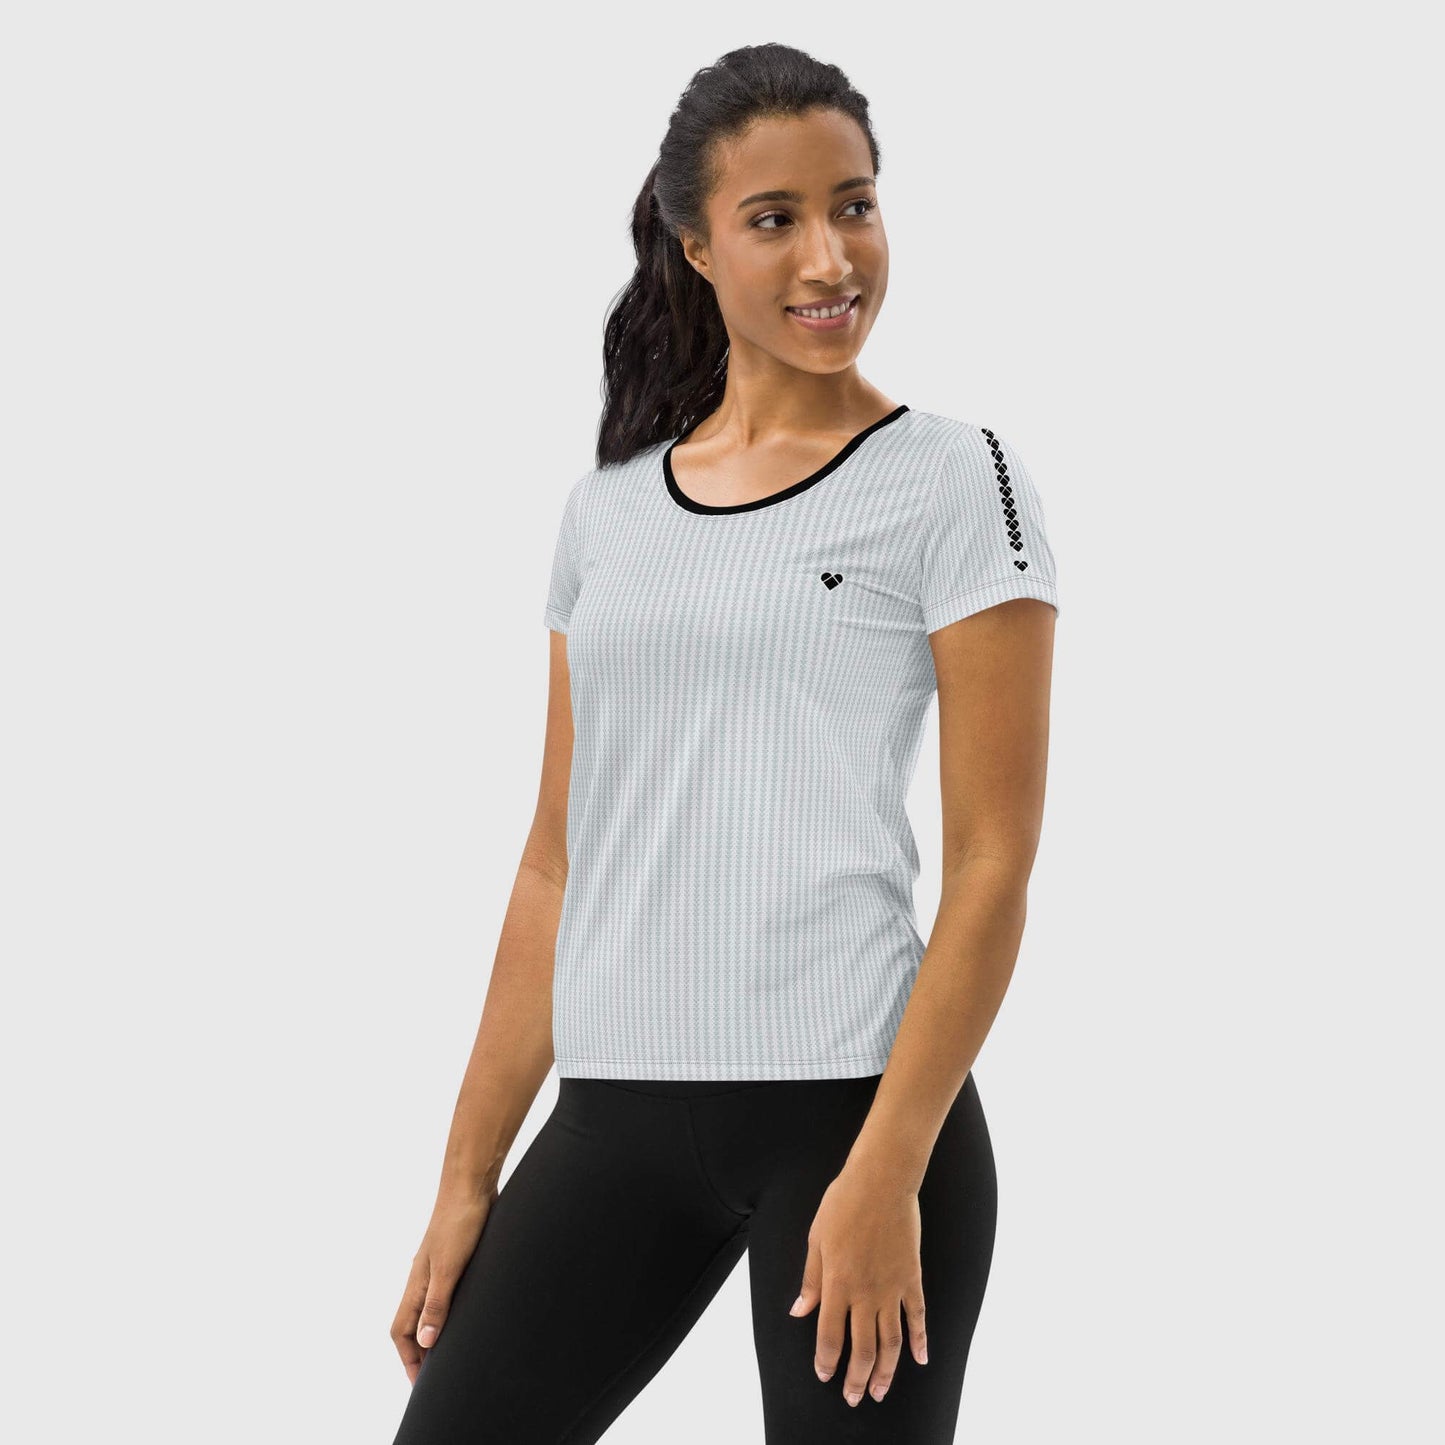 girl model wearing Sport shirt for gym enthusiasts with light gray dualshade lovogram pattern and big black heart from CRiZ AMOR's Amor Primero capsule collection